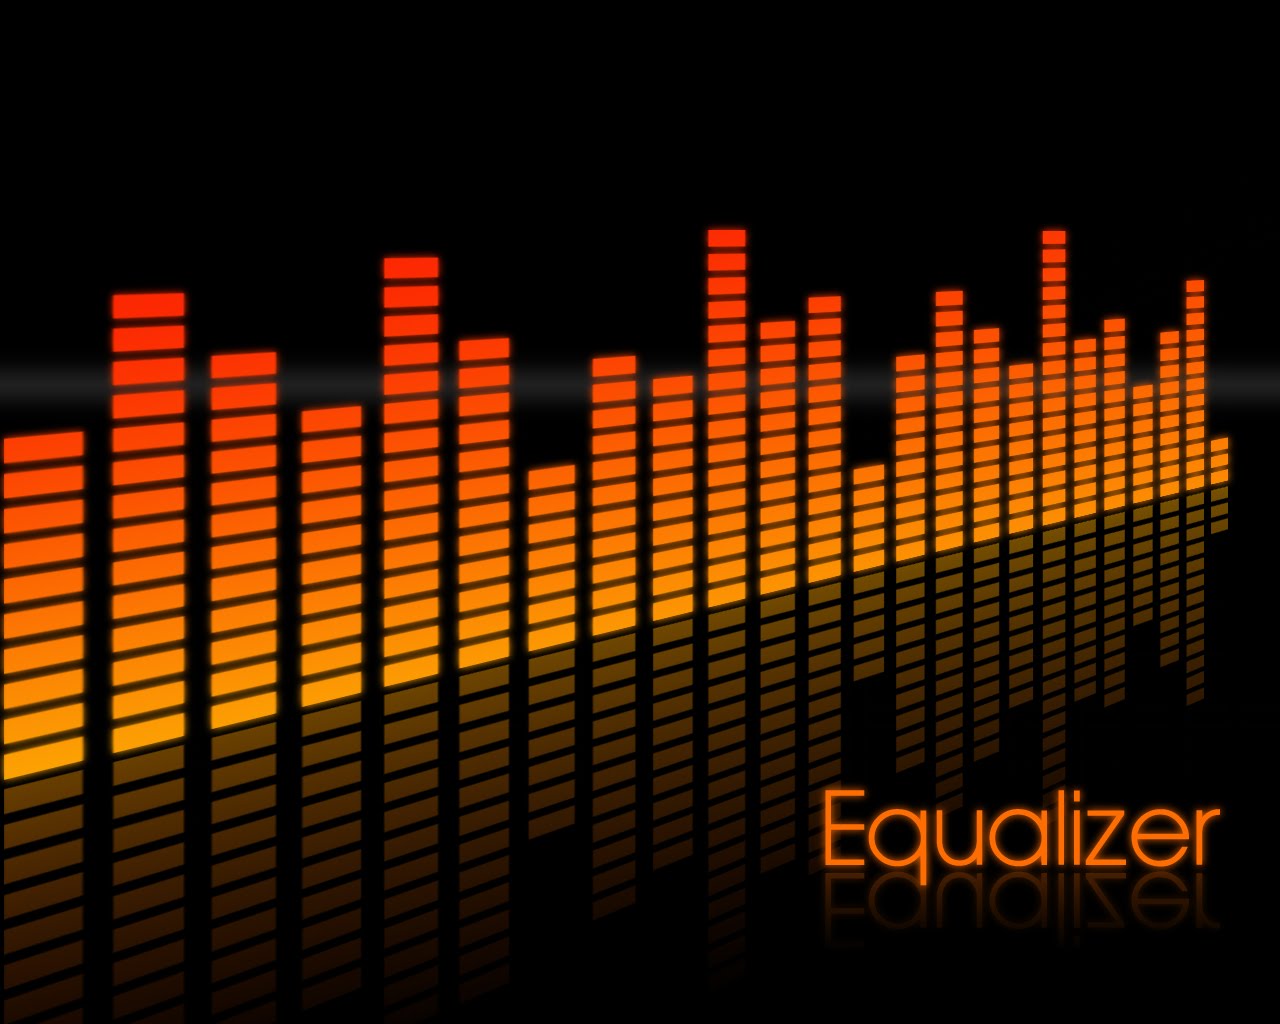 Graphic Equalizer Wallpaper Cool Designs Invoice